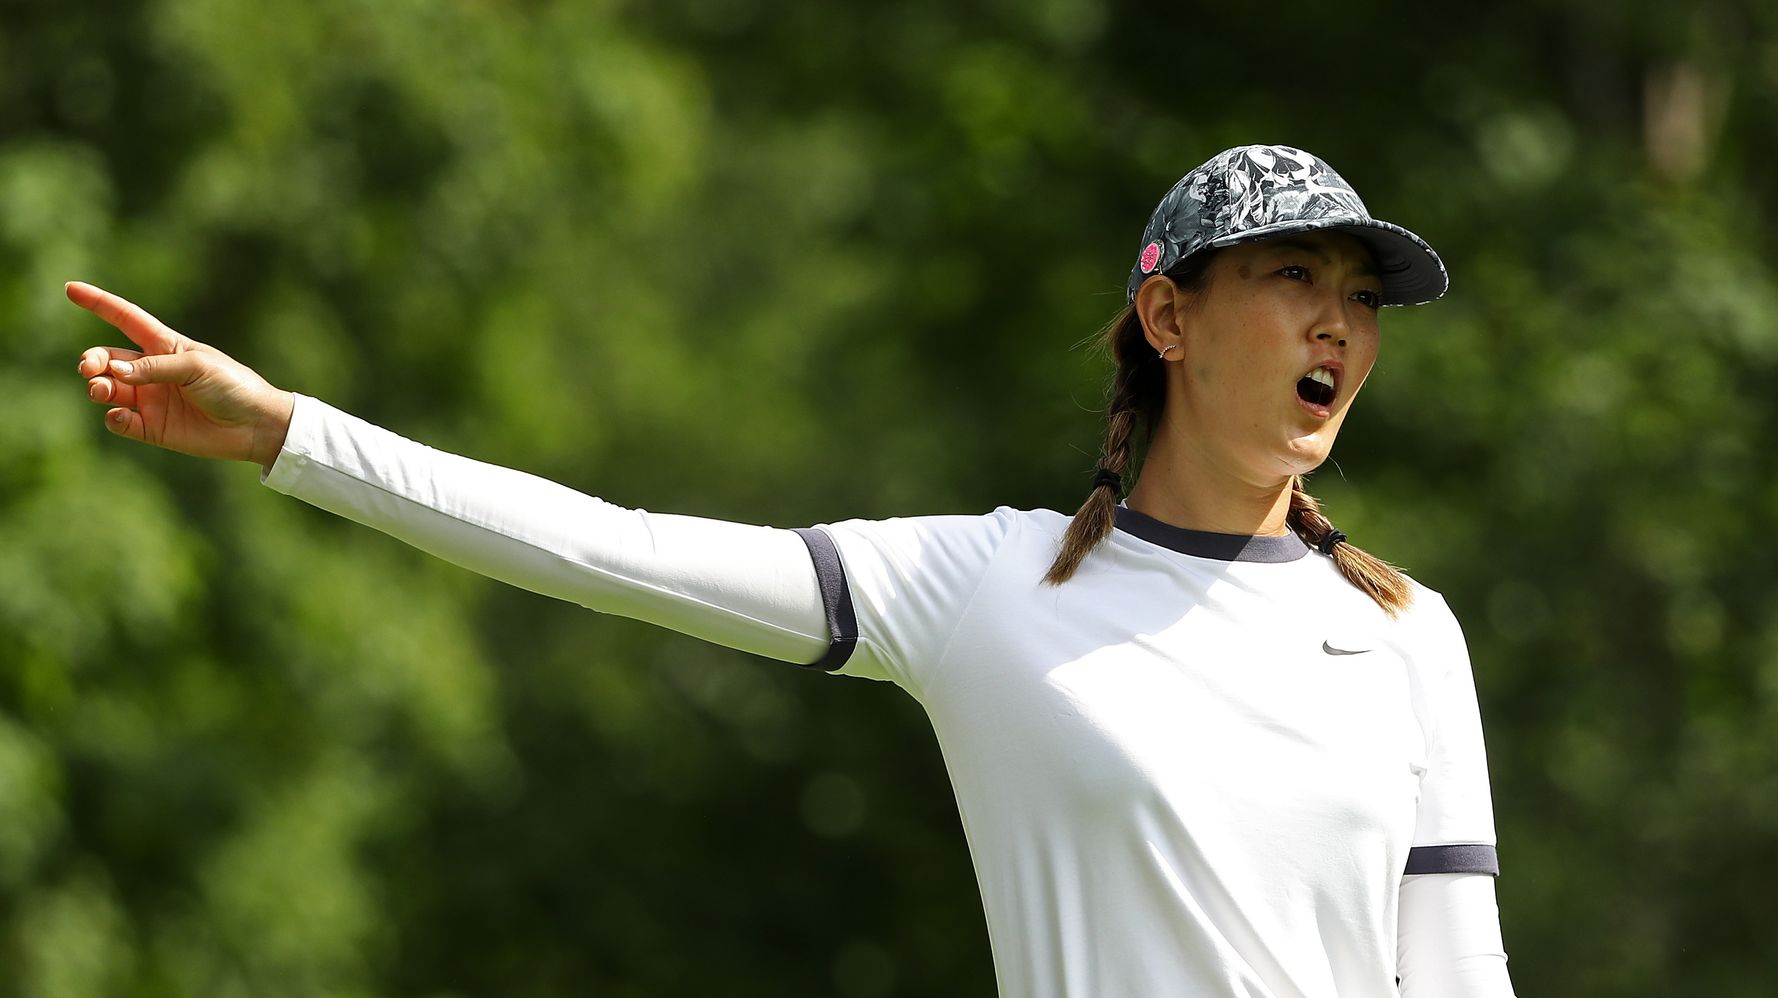 Professional golfer Michelle Wie disgusted by Rudy Giuliani’s scary story about her ‘panties’